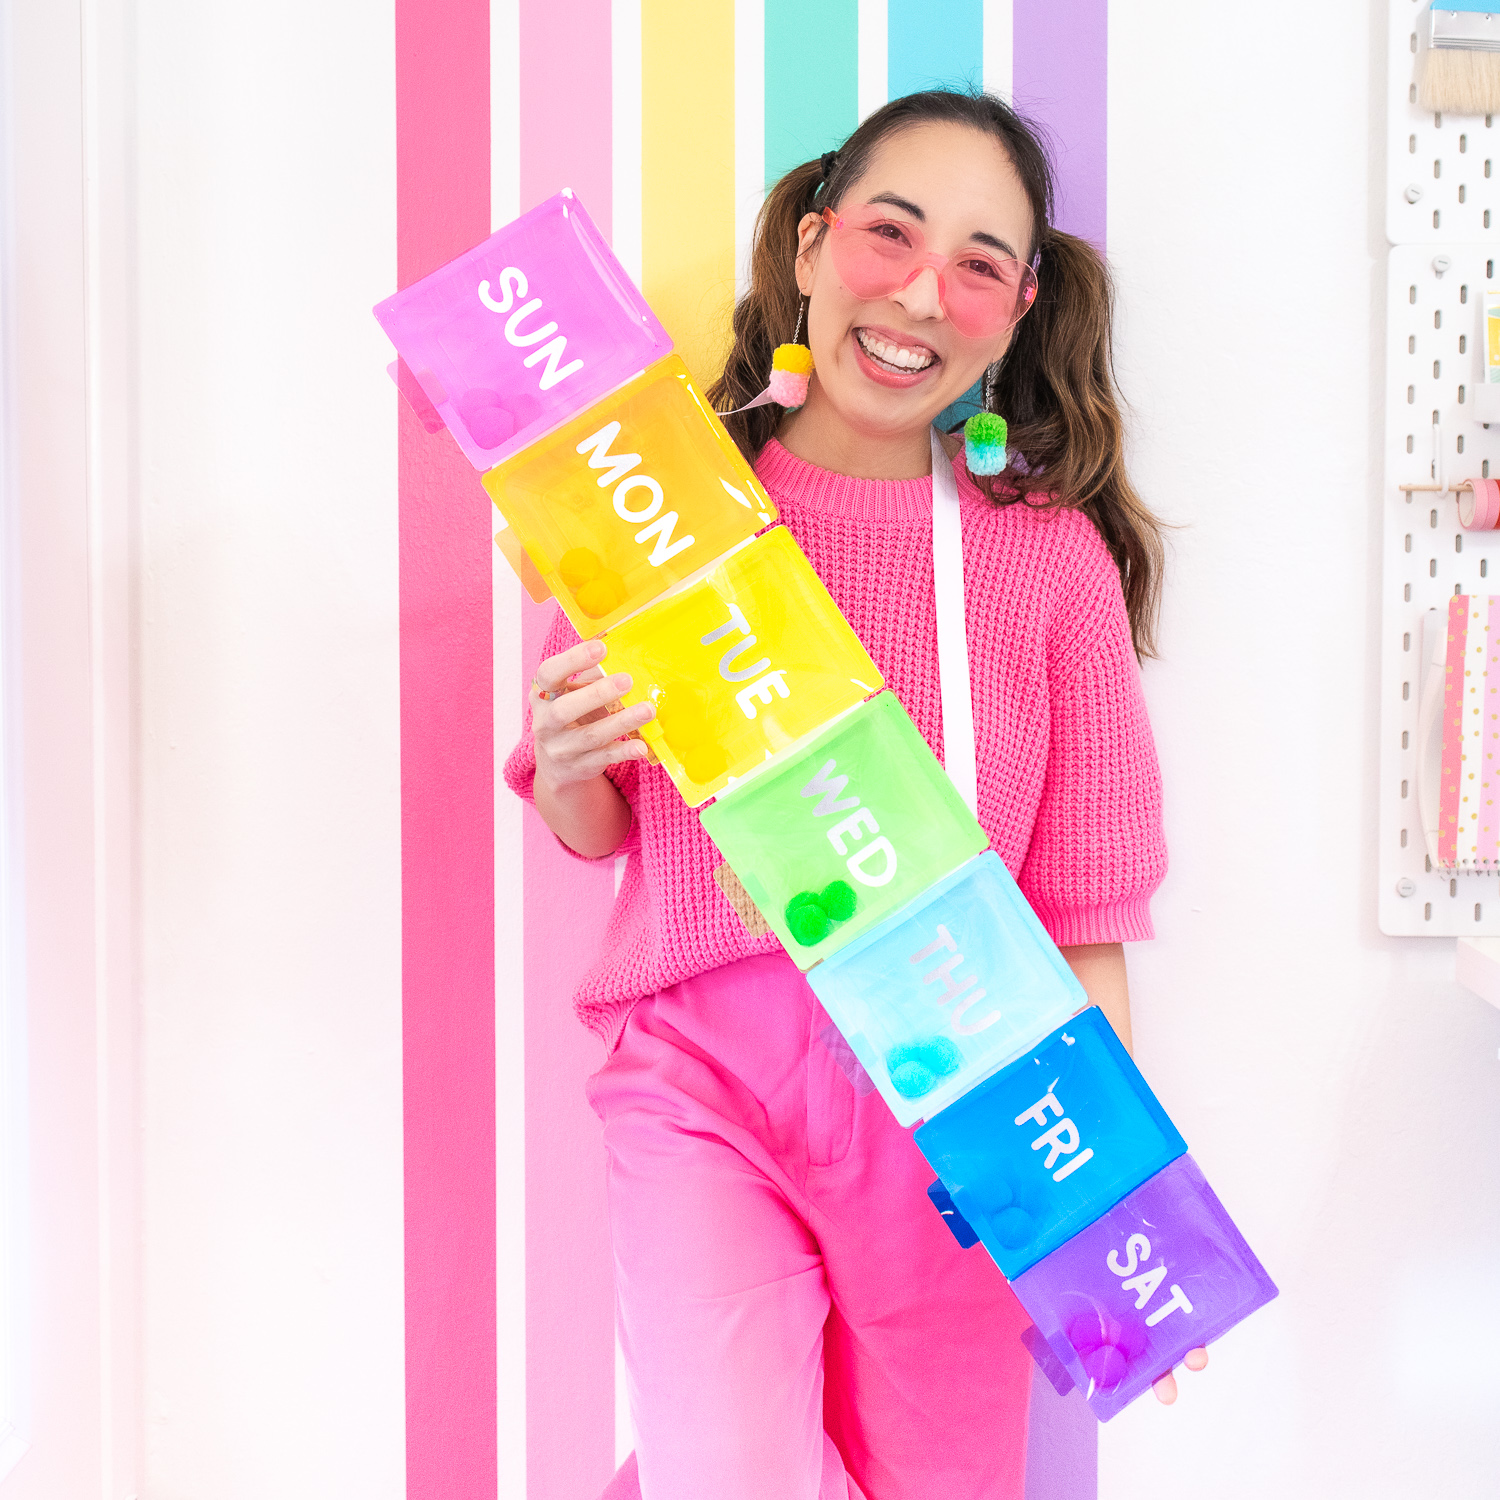 Blaire, an Asian woman with brown hair is wearing a hot pink sweater and pants. She is wearing a rainbow pillbox costume and standing in front of rainbow wall in her craft room.